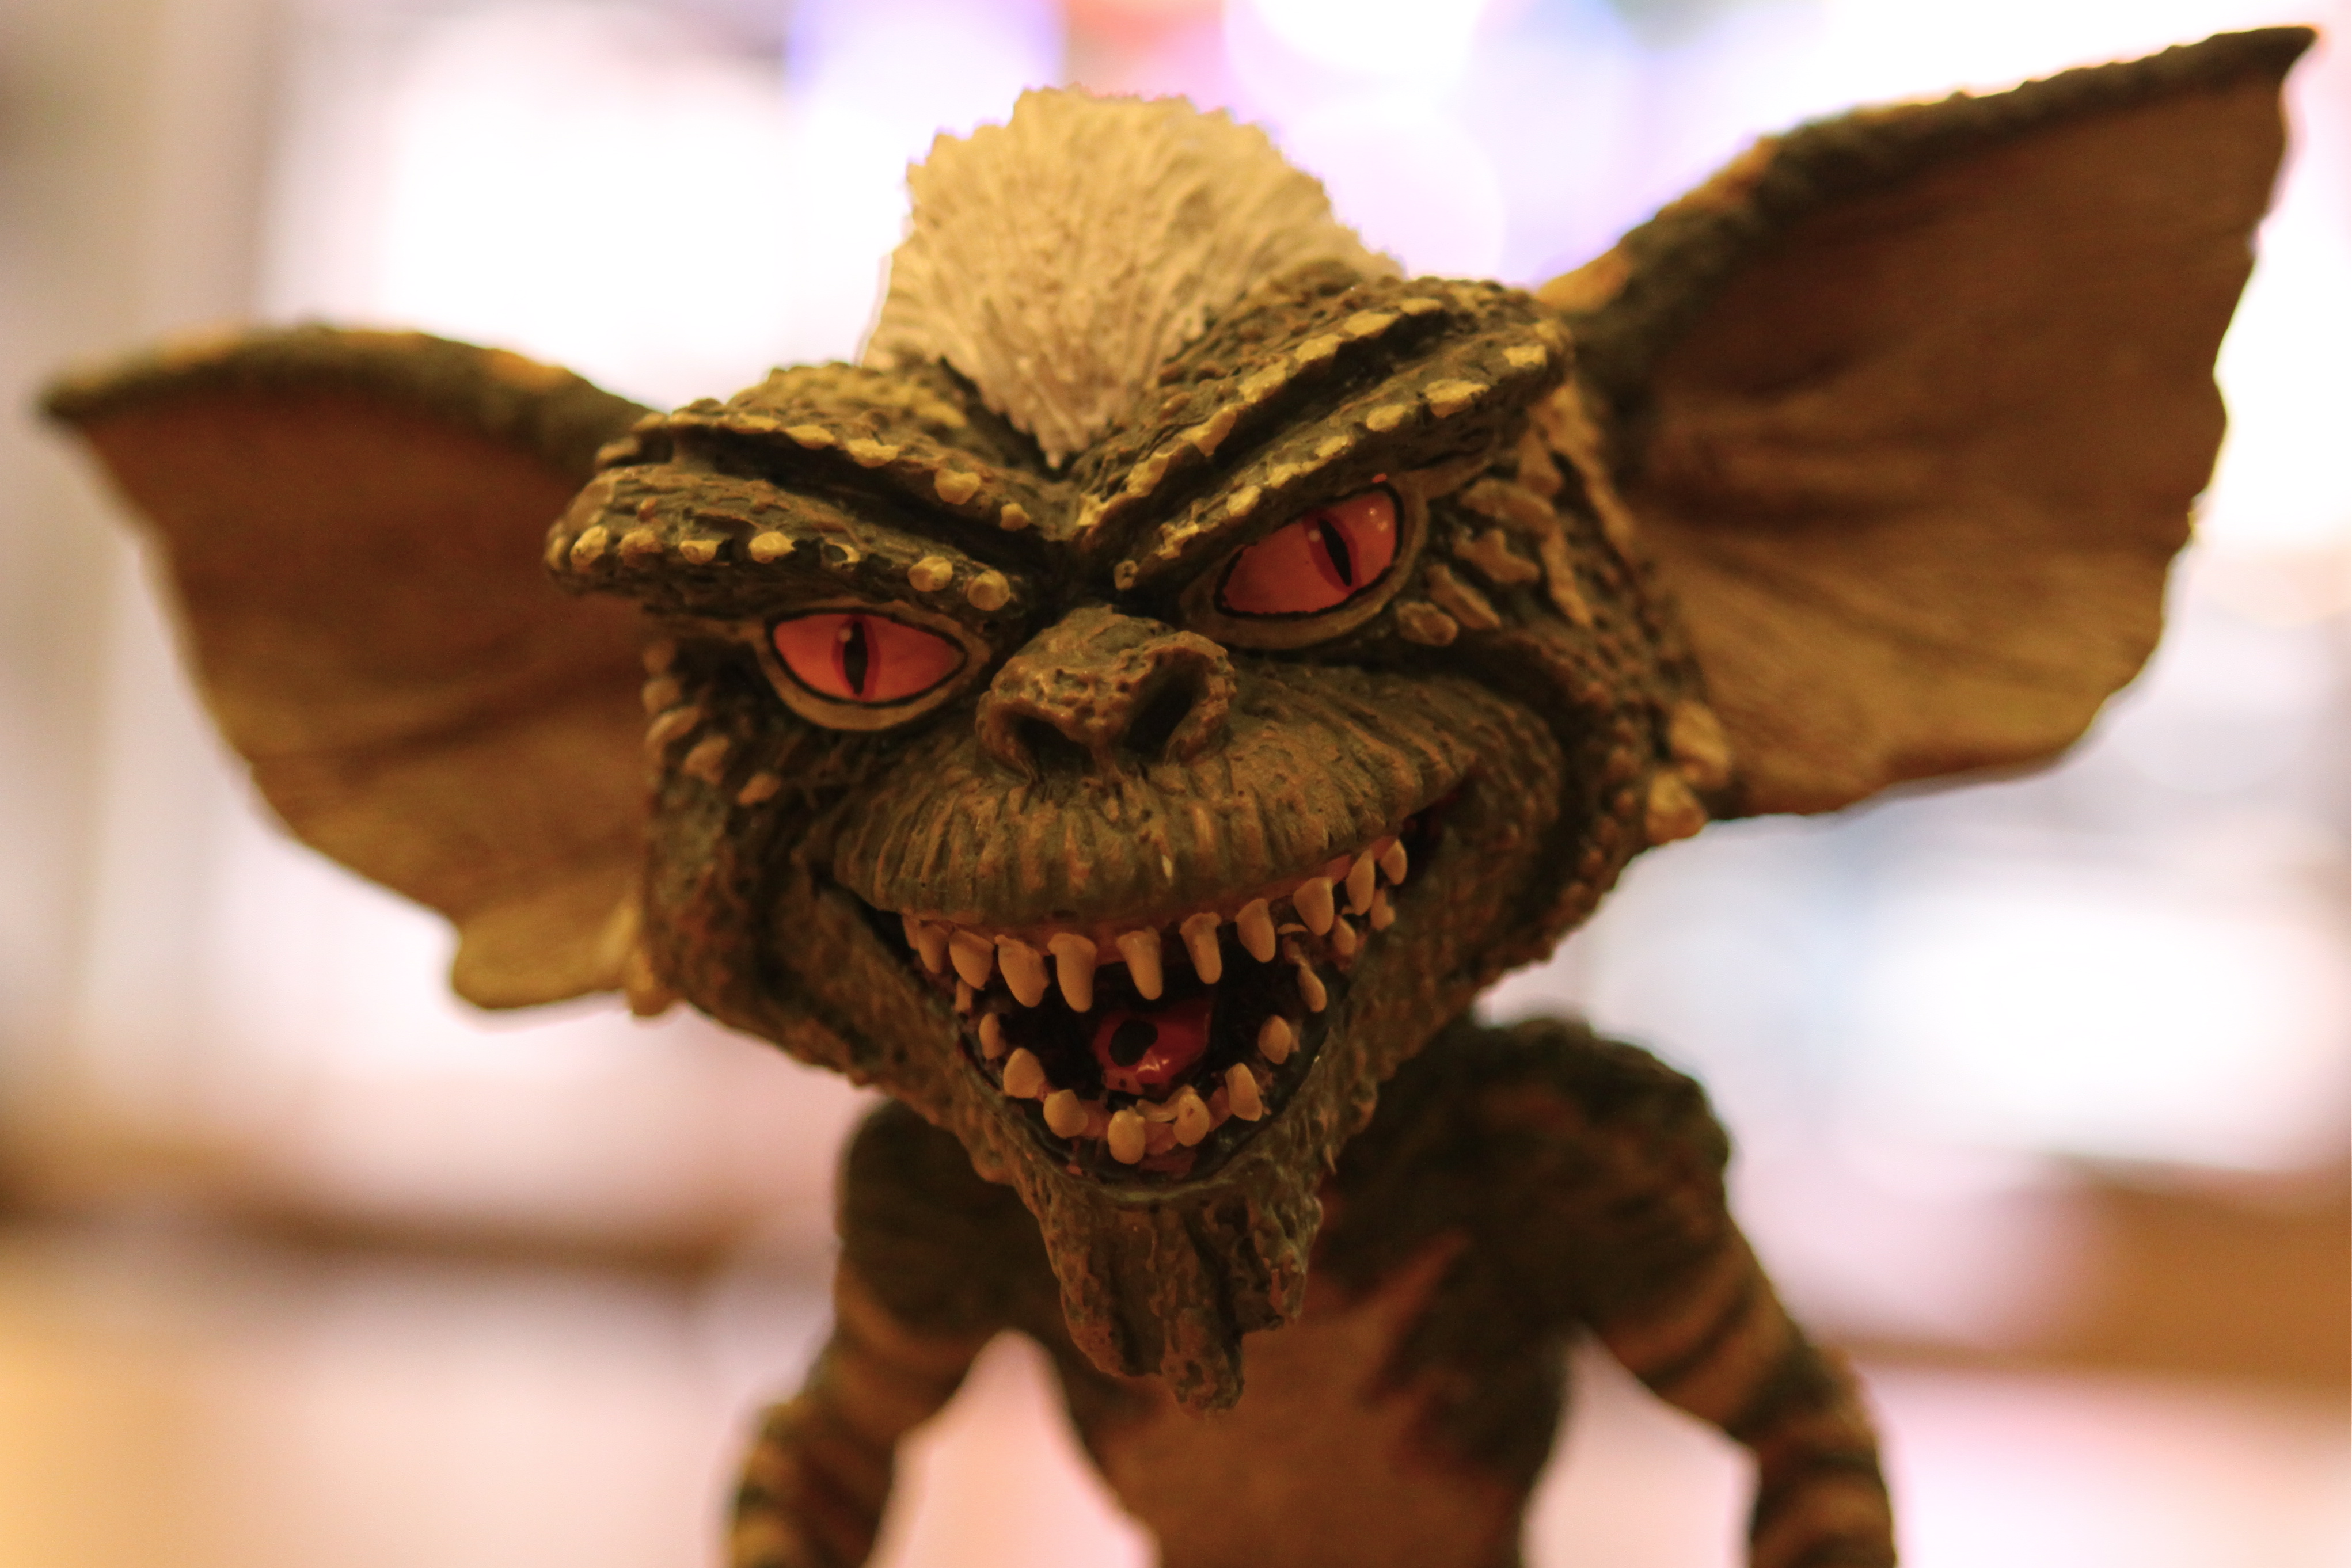 Amazing Gremlins Pictures & Backgrounds